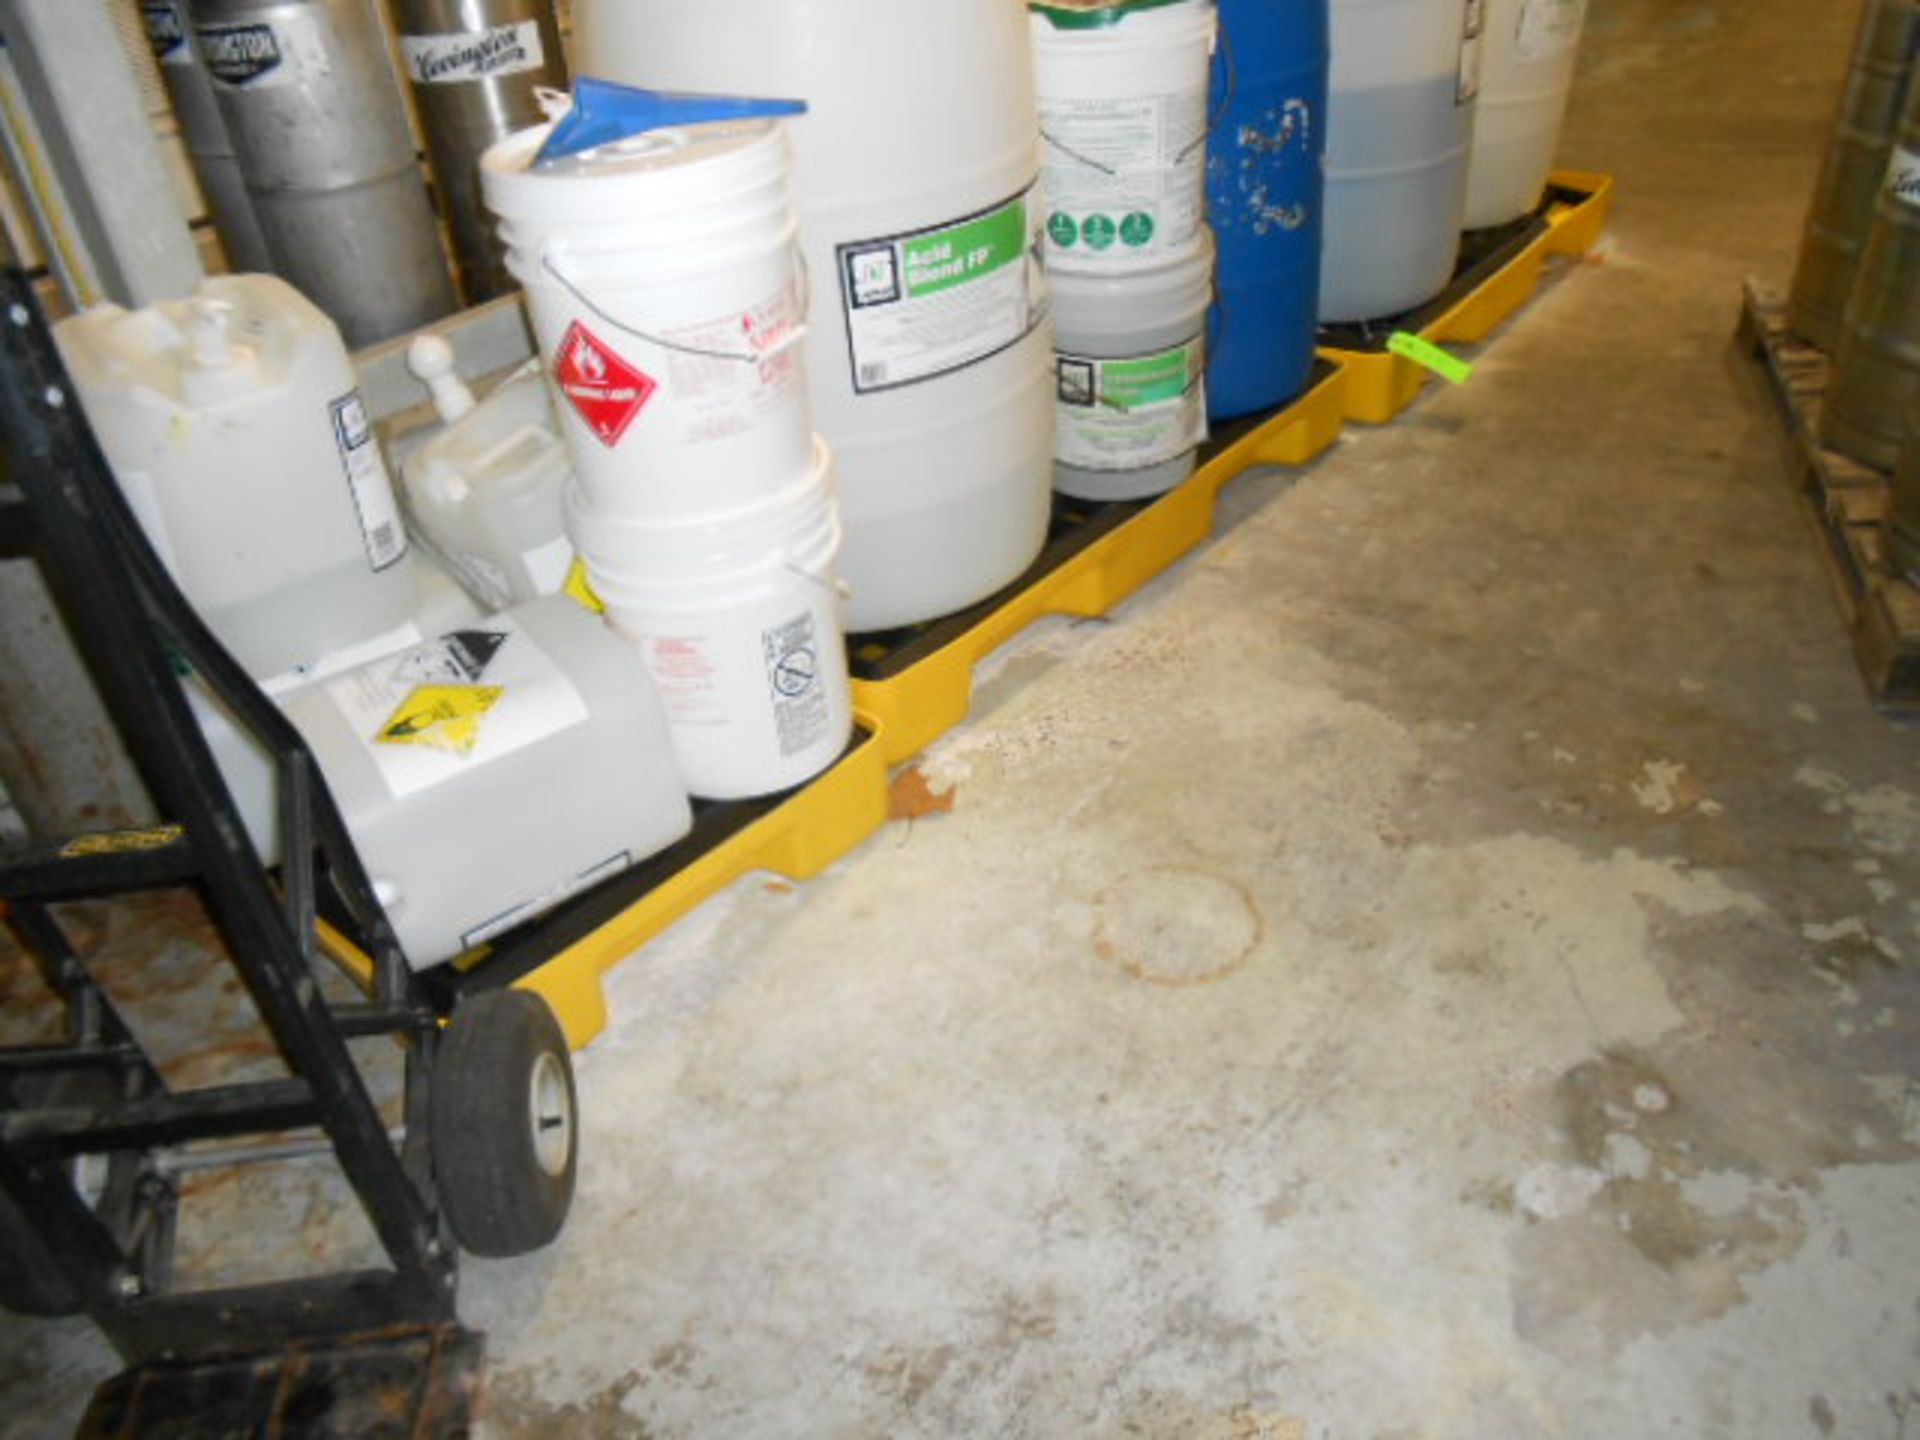 LOT of 3 chemical spill platform, 1 24 in x 24 in, 2 24 in x 48 in ***NOTE FROM AUCTIONEER***